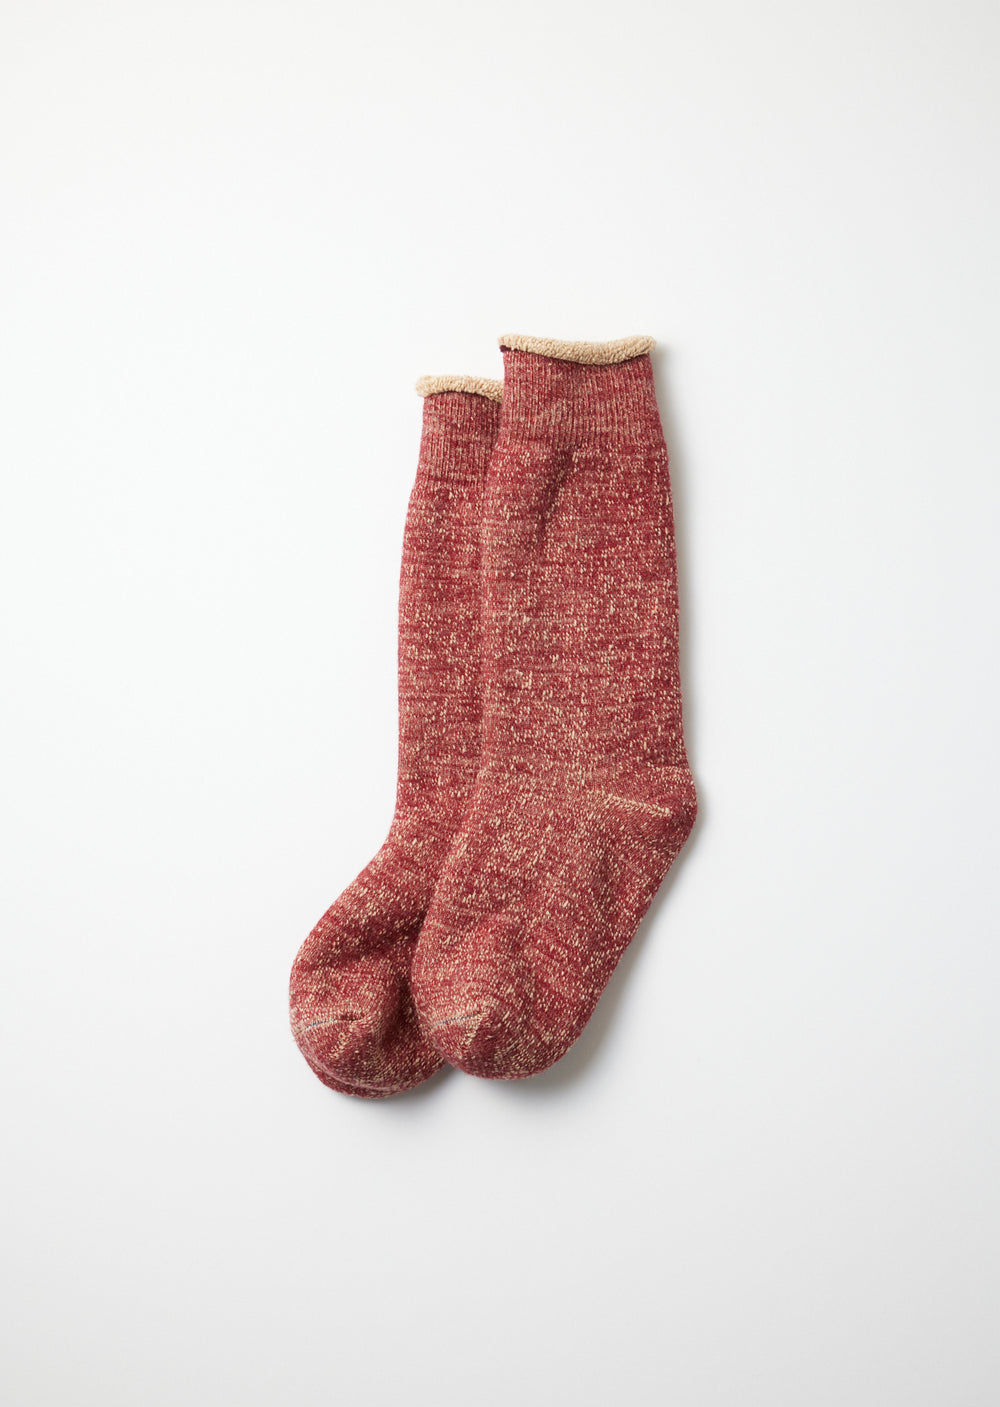 Double Face Crew Socks - D.Red/Brown - R1001